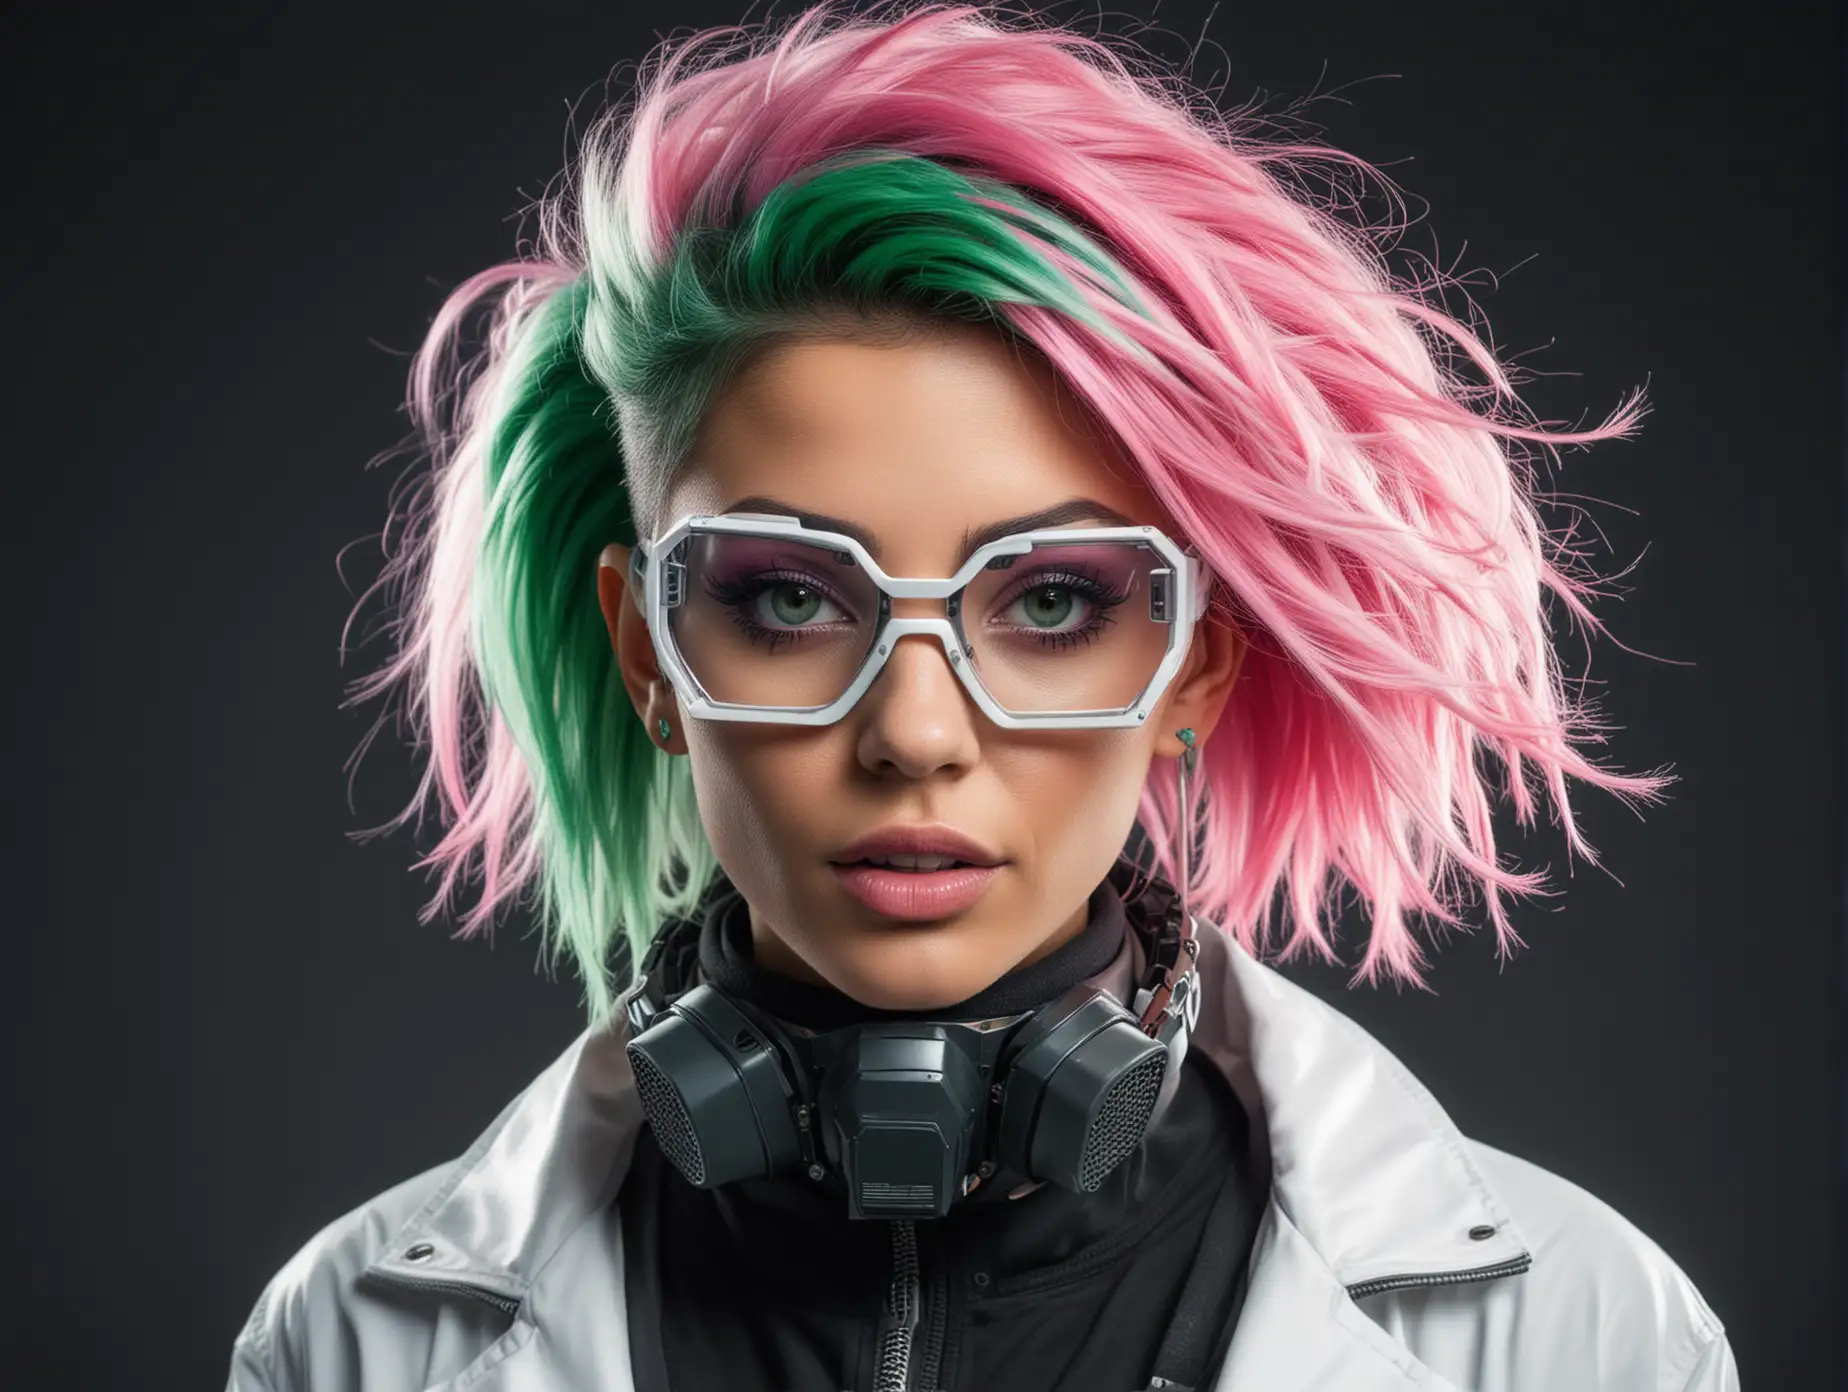 Futuristic-Woman-Scientist-with-Green-and-Pink-Punk-Hair-in-Tech-Mouthmask